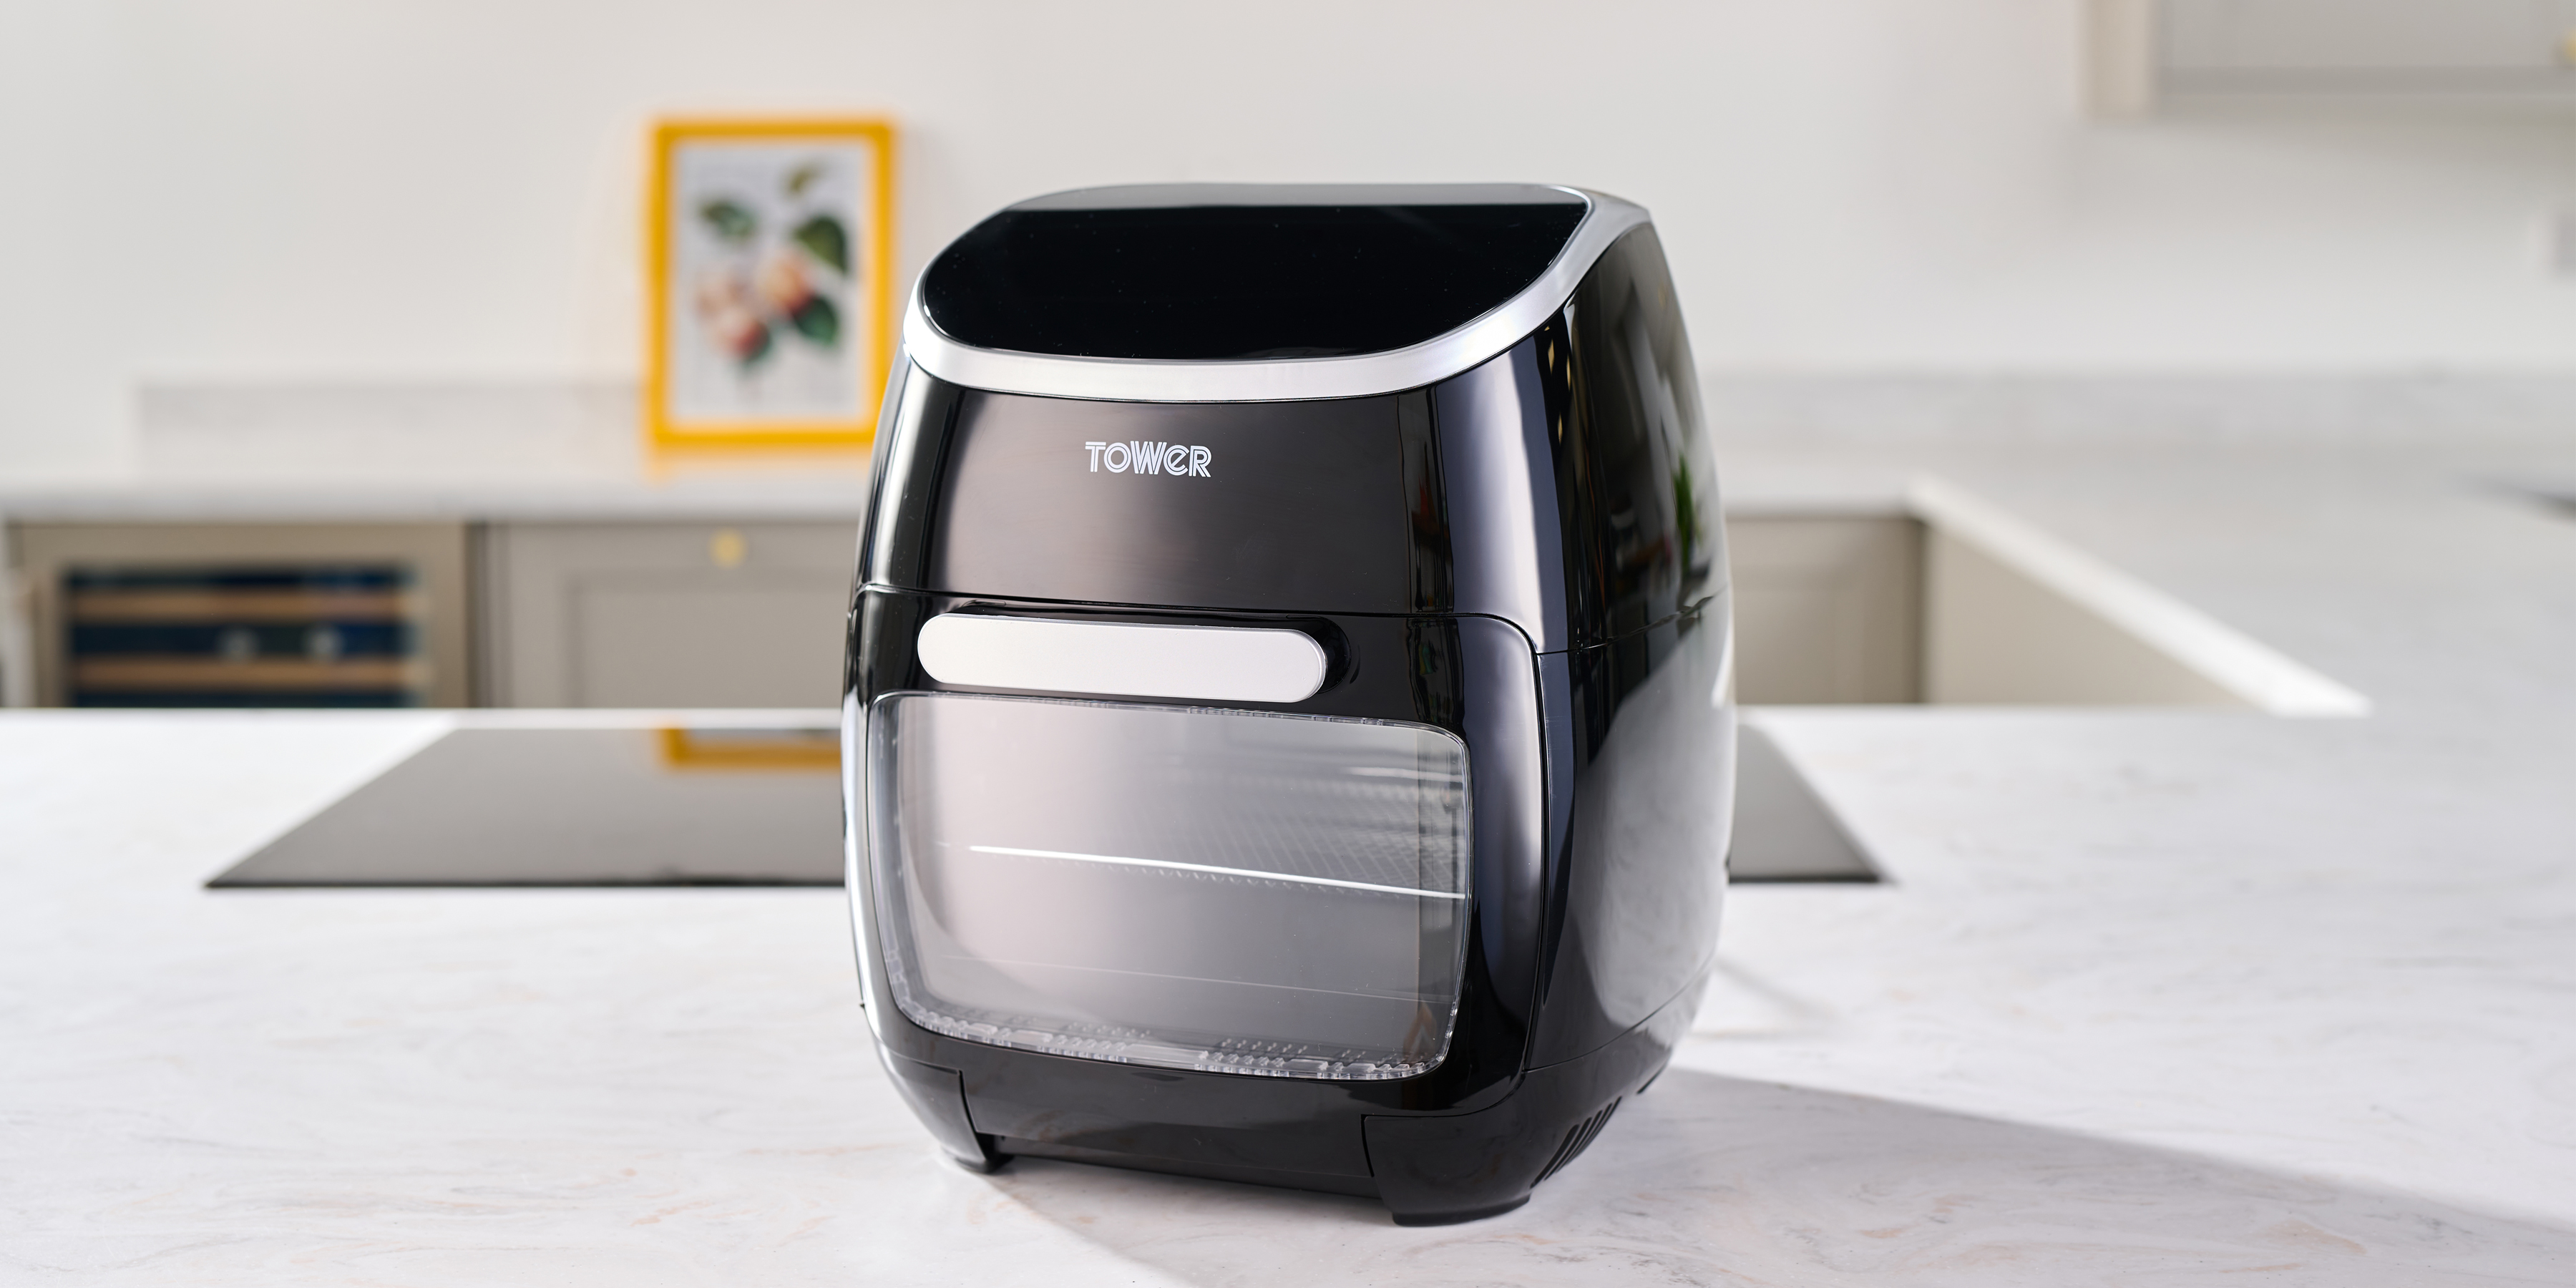 Image of Tower Air fryer during testing